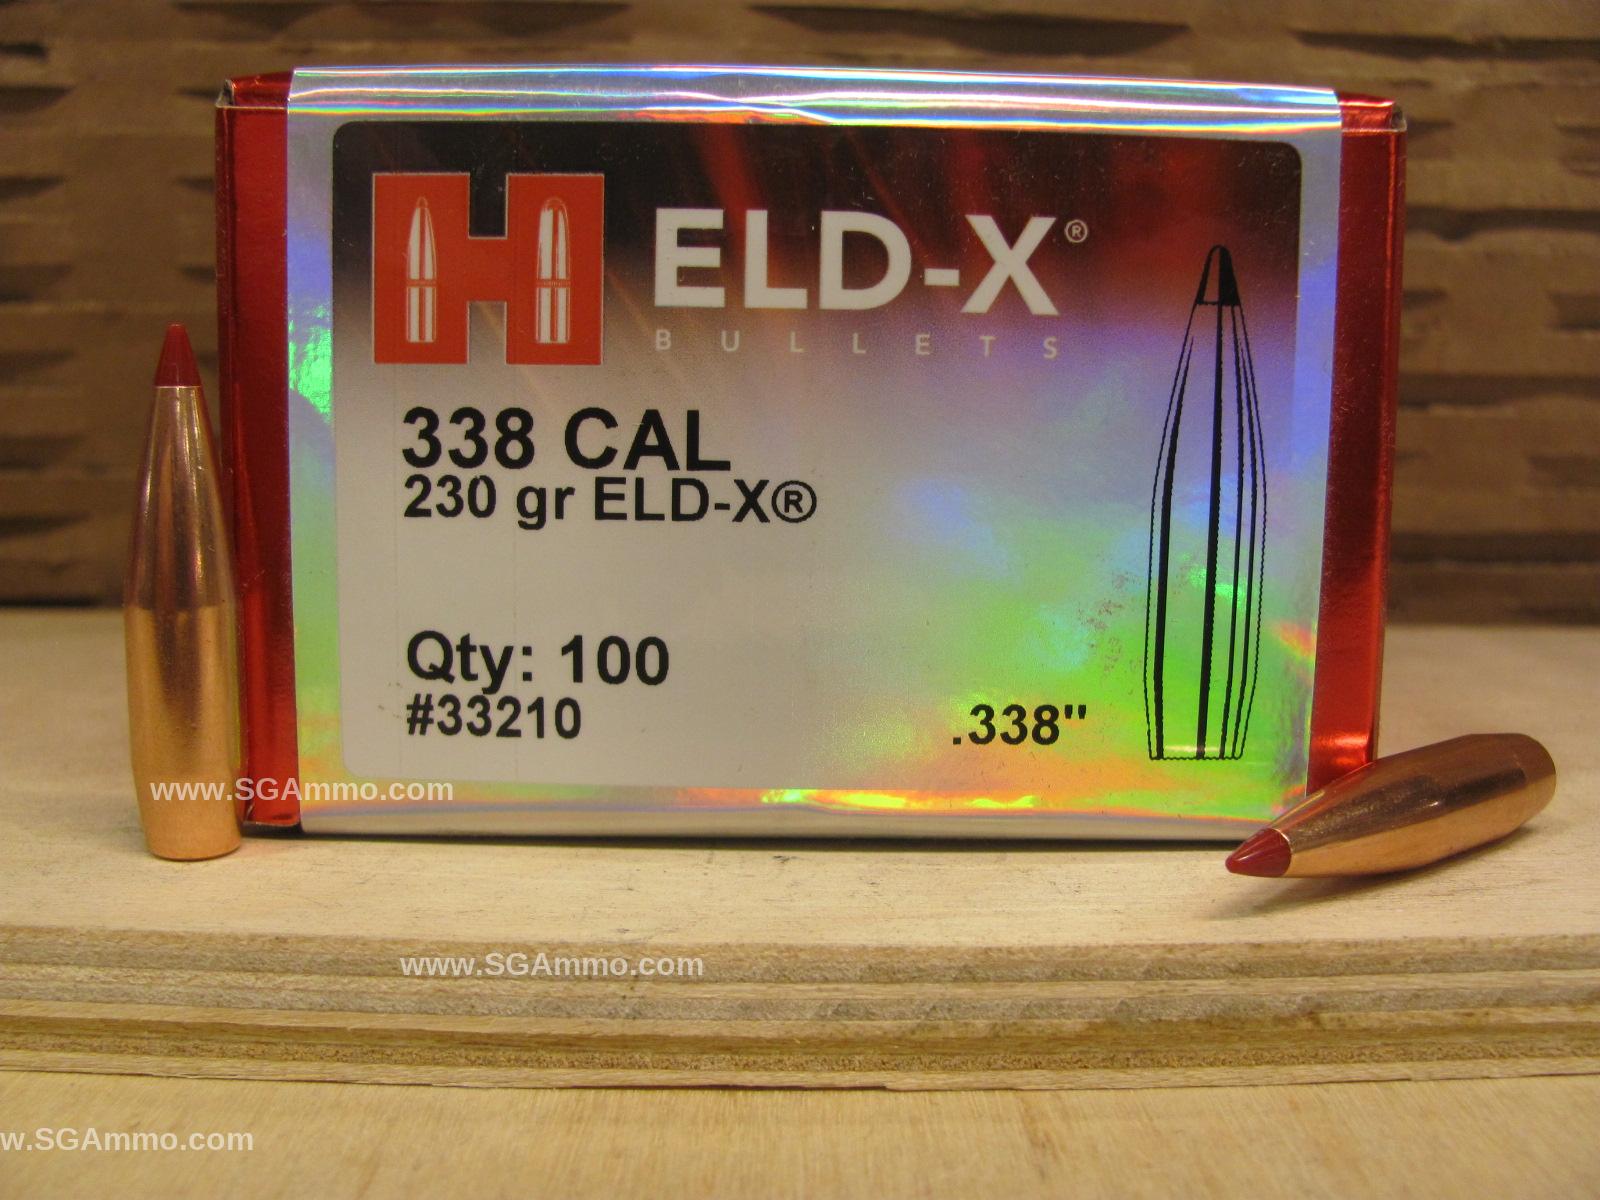 100 Count Box - 338 Cal 230 Grain ELD-X Projectile For Handloading .338